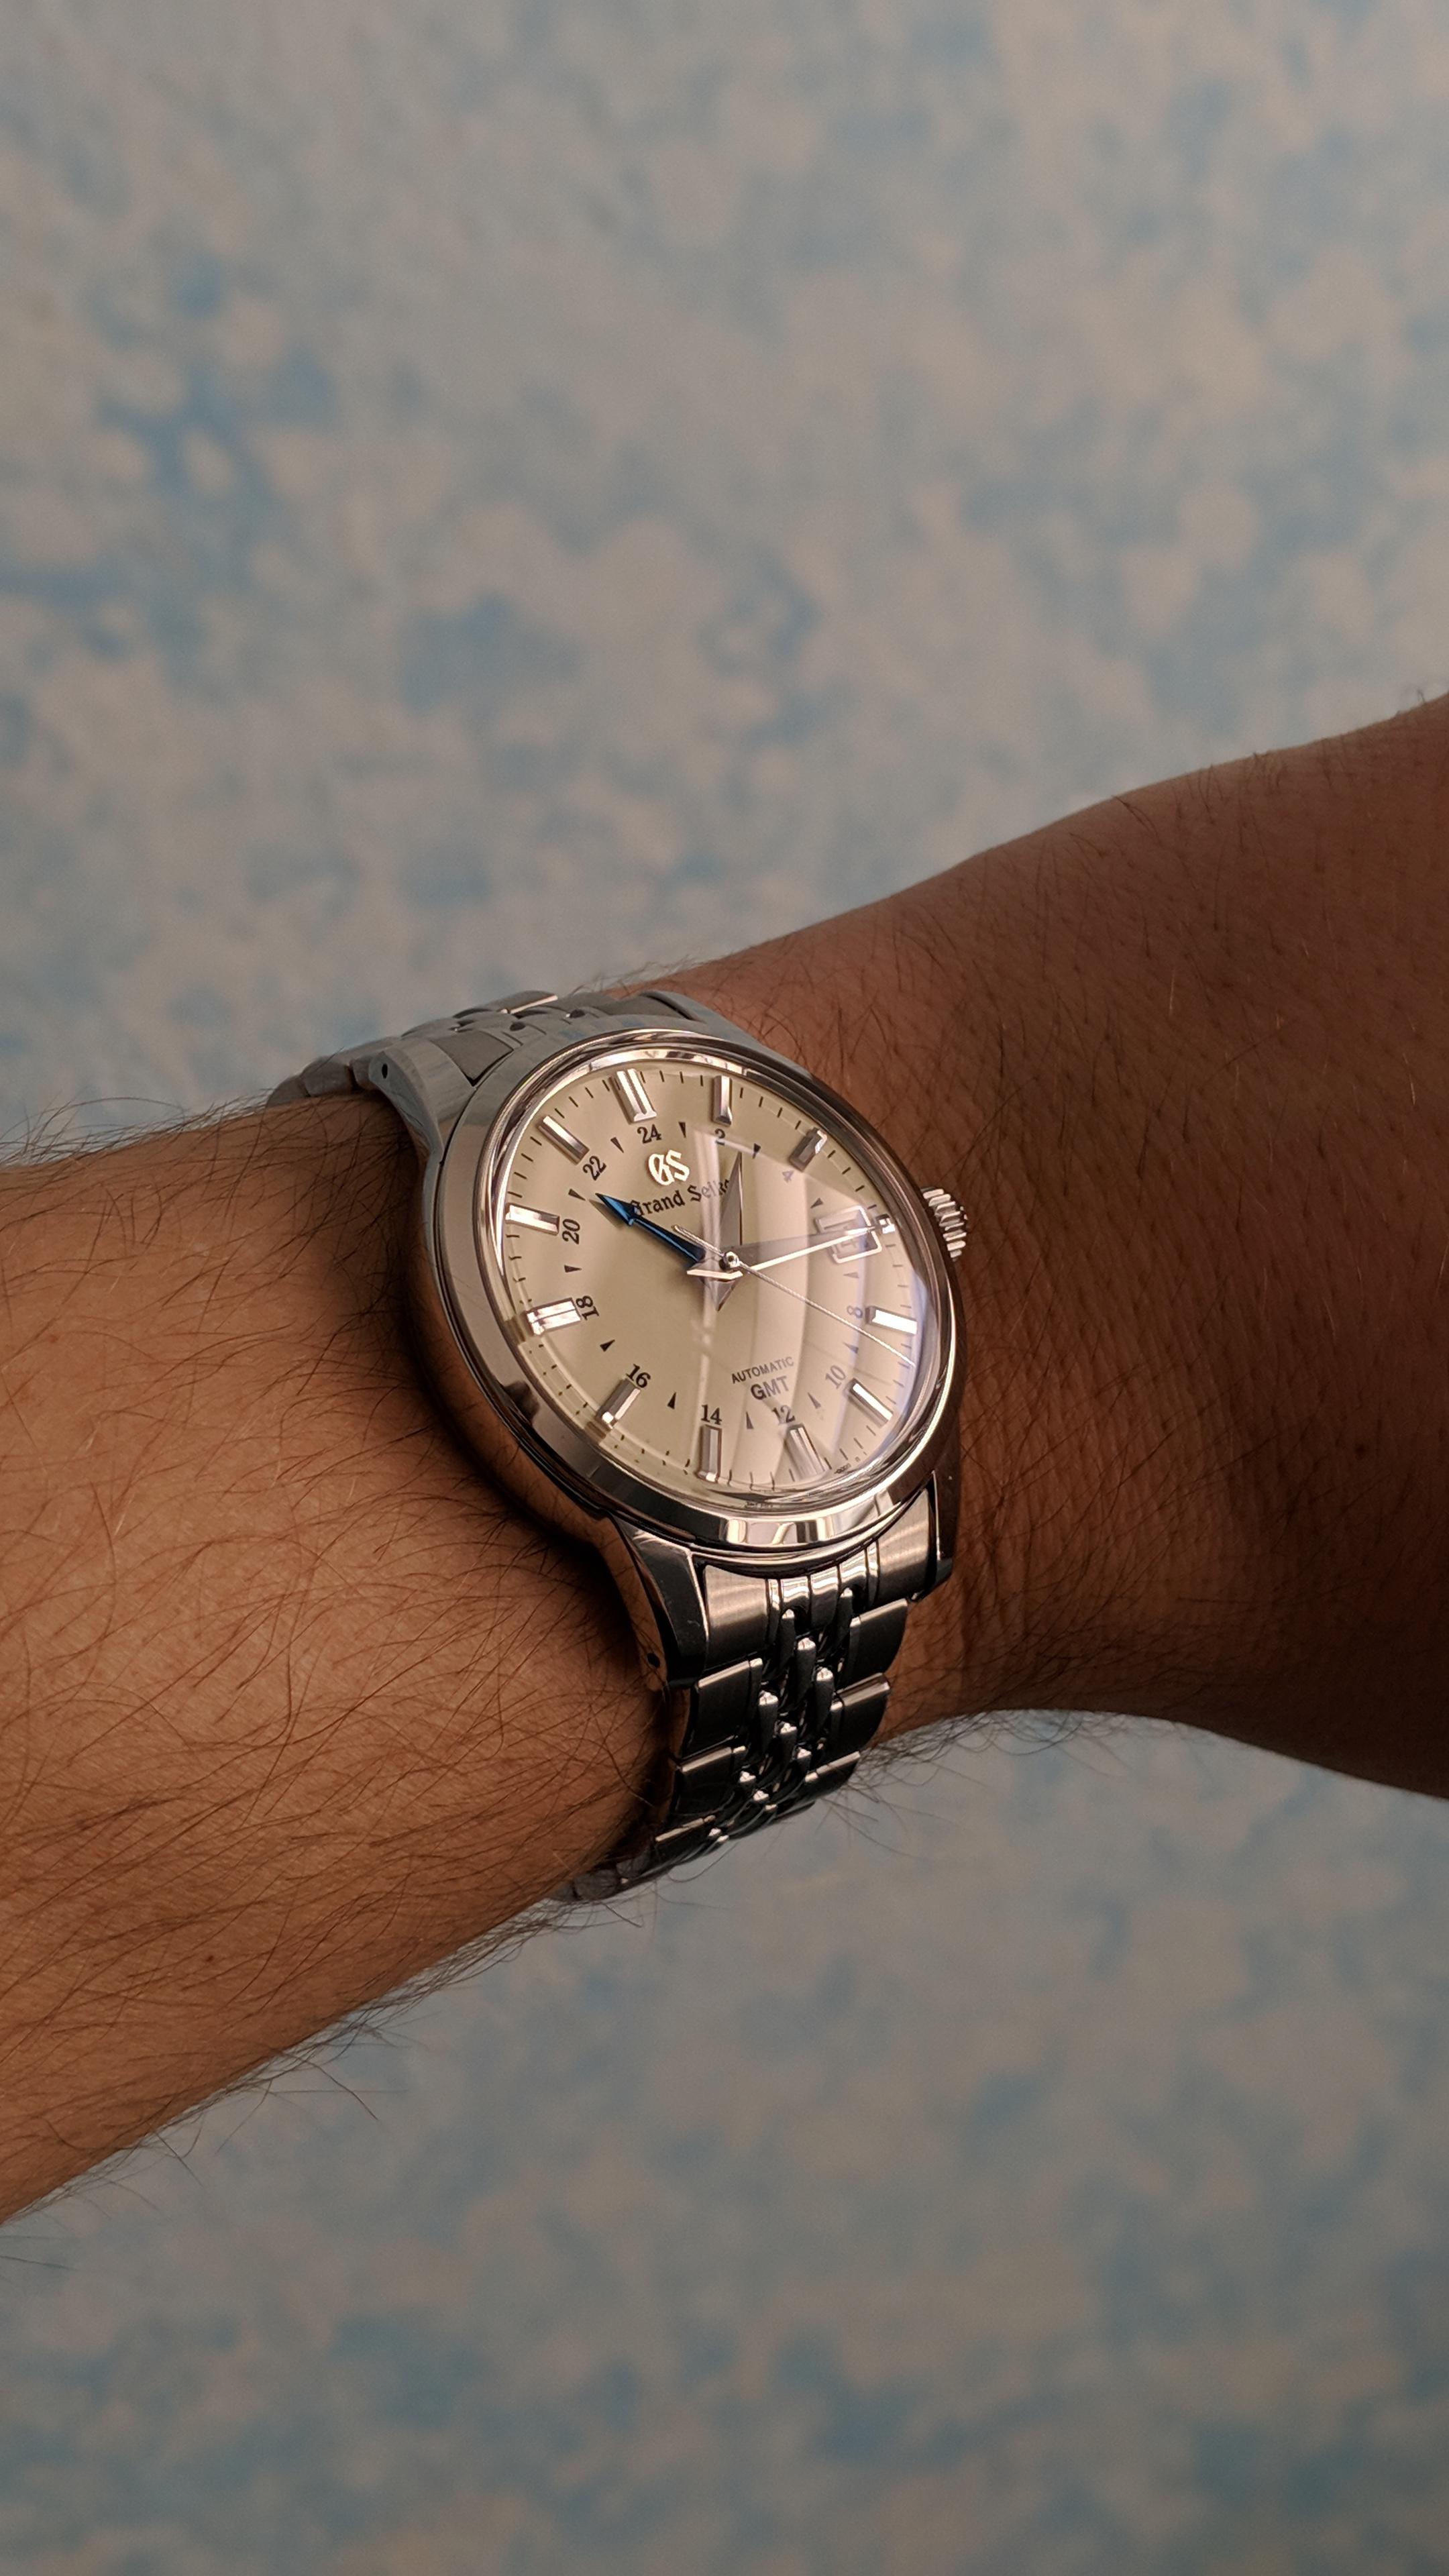 WTS] Grand Seiko GMT SBGM221 Full Kit (Grand Seiko beads-of-rice bracelet  included) | WatchCharts